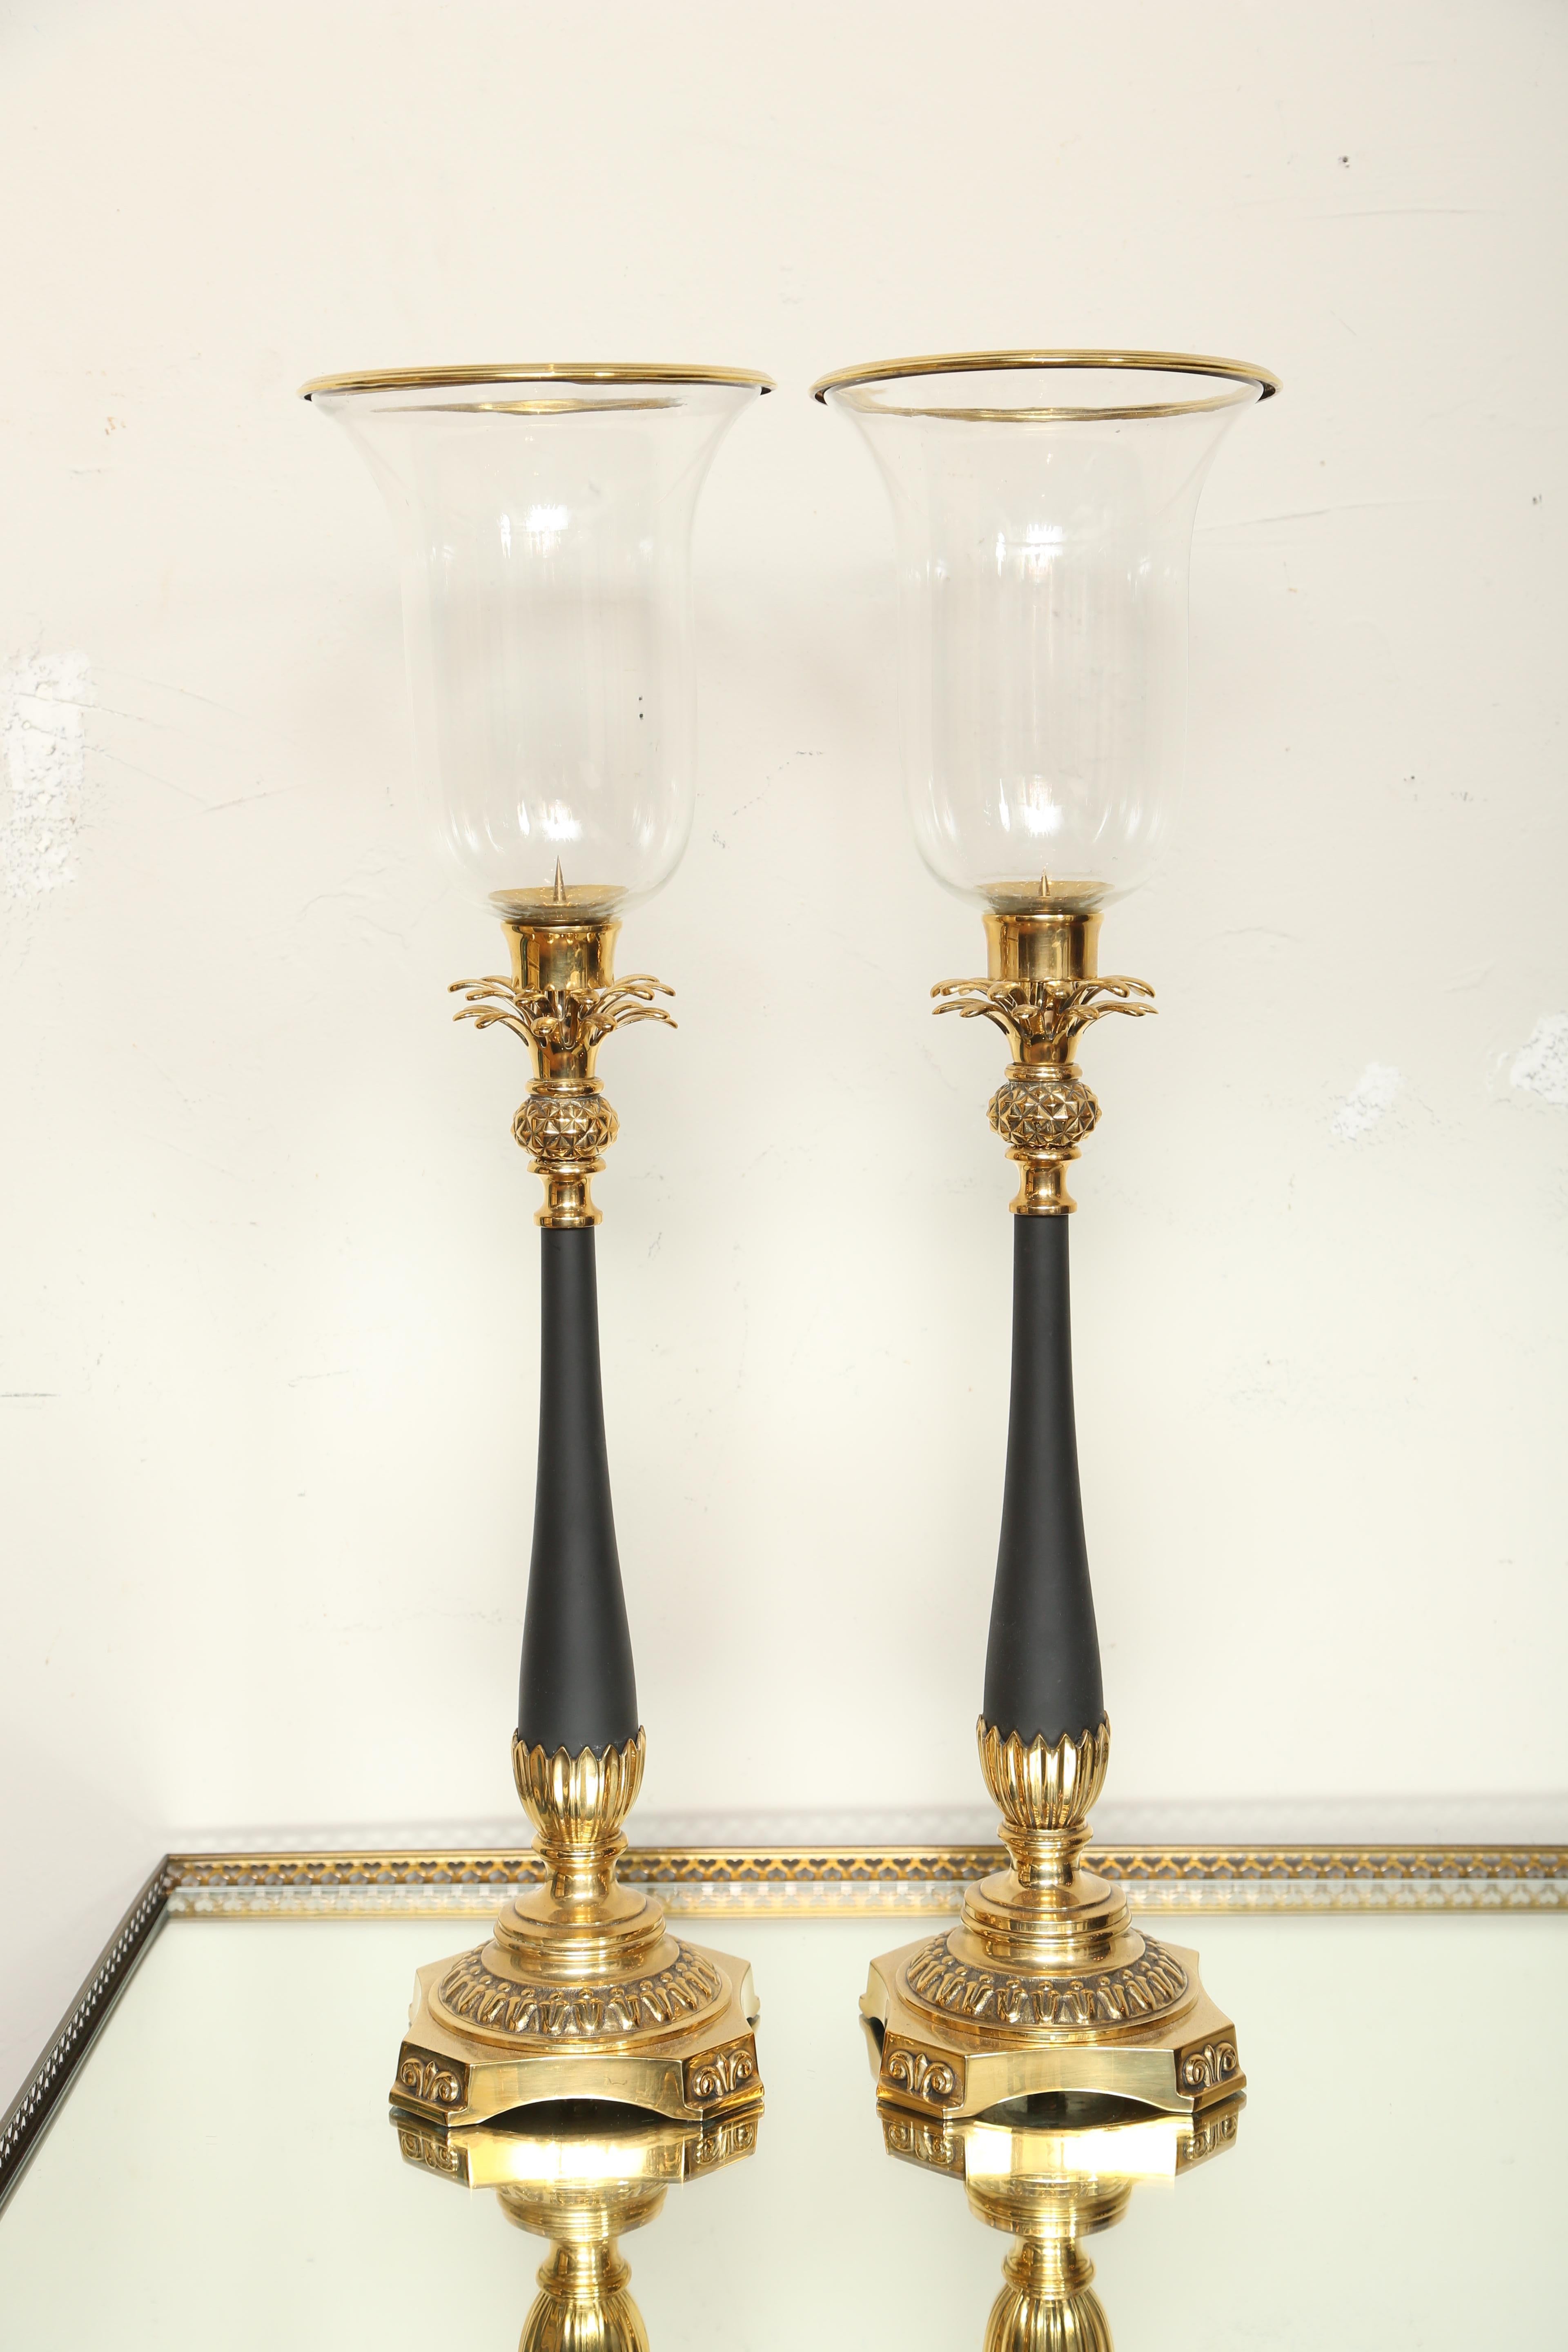 Pair of brass and black bisque pineapple hurricanes. Removable brass rim on top of glass.